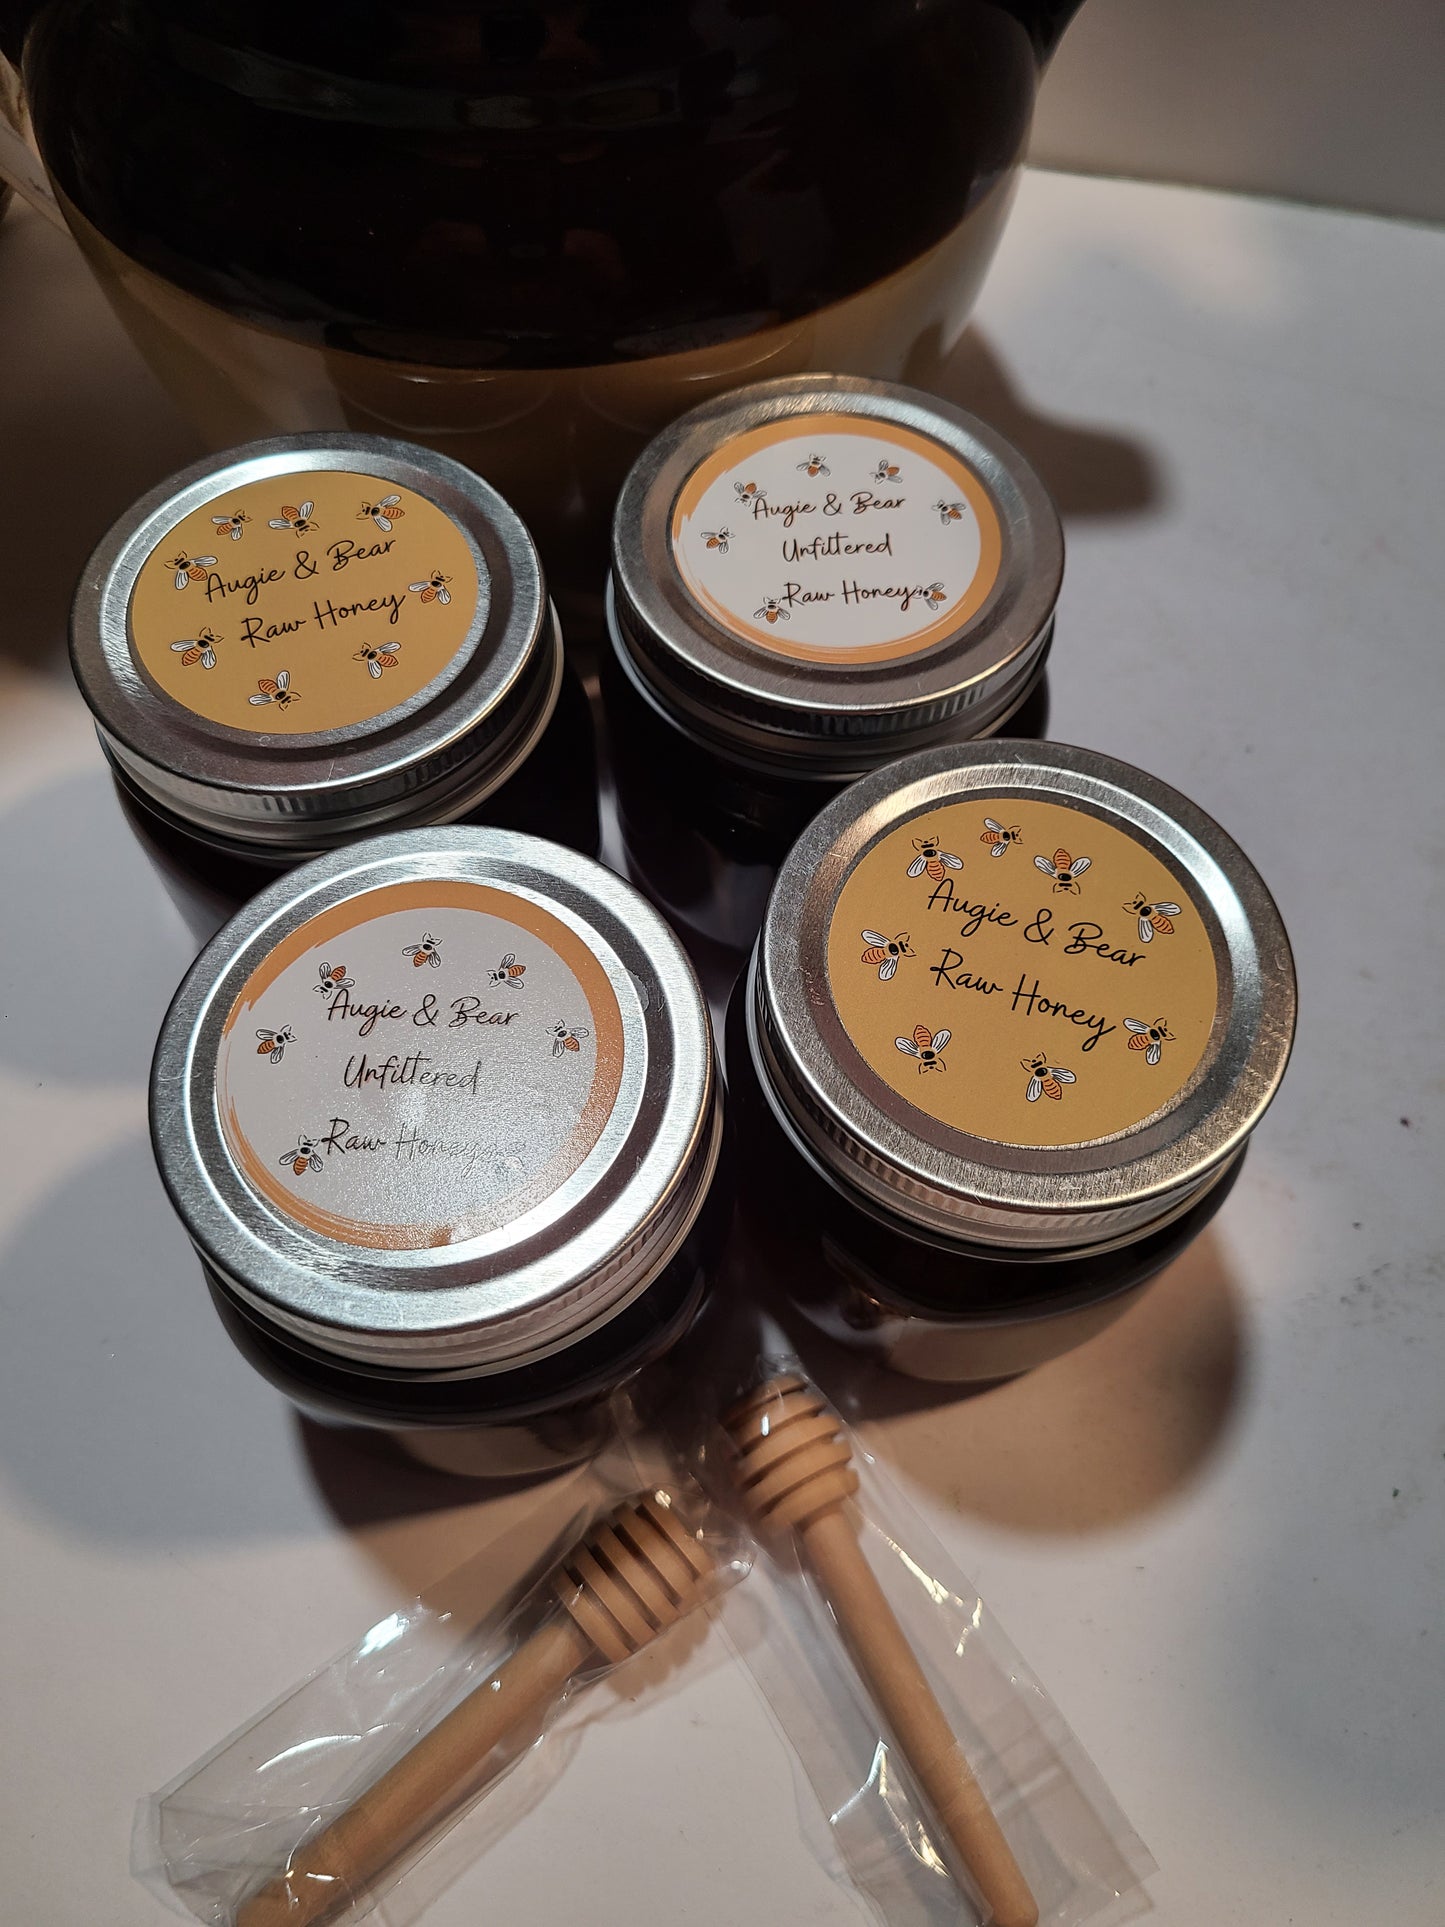 Augie and Bear Unfiltered Raw Honey 8oz jars